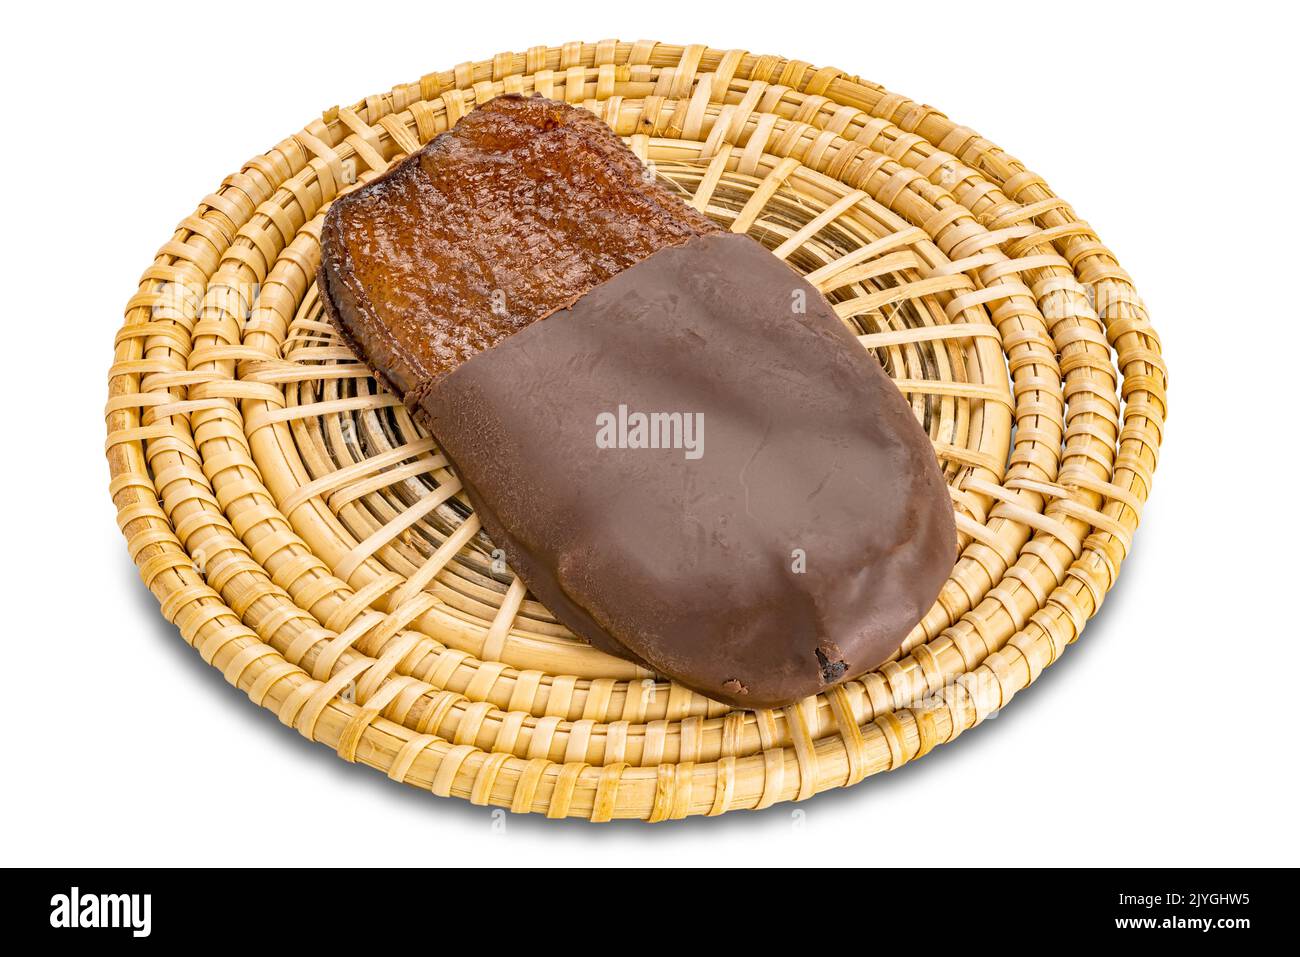 Single solar dried flat banana dipped melted chocolate on bamboo mat isolated on white background with clipping path. Stock Photo